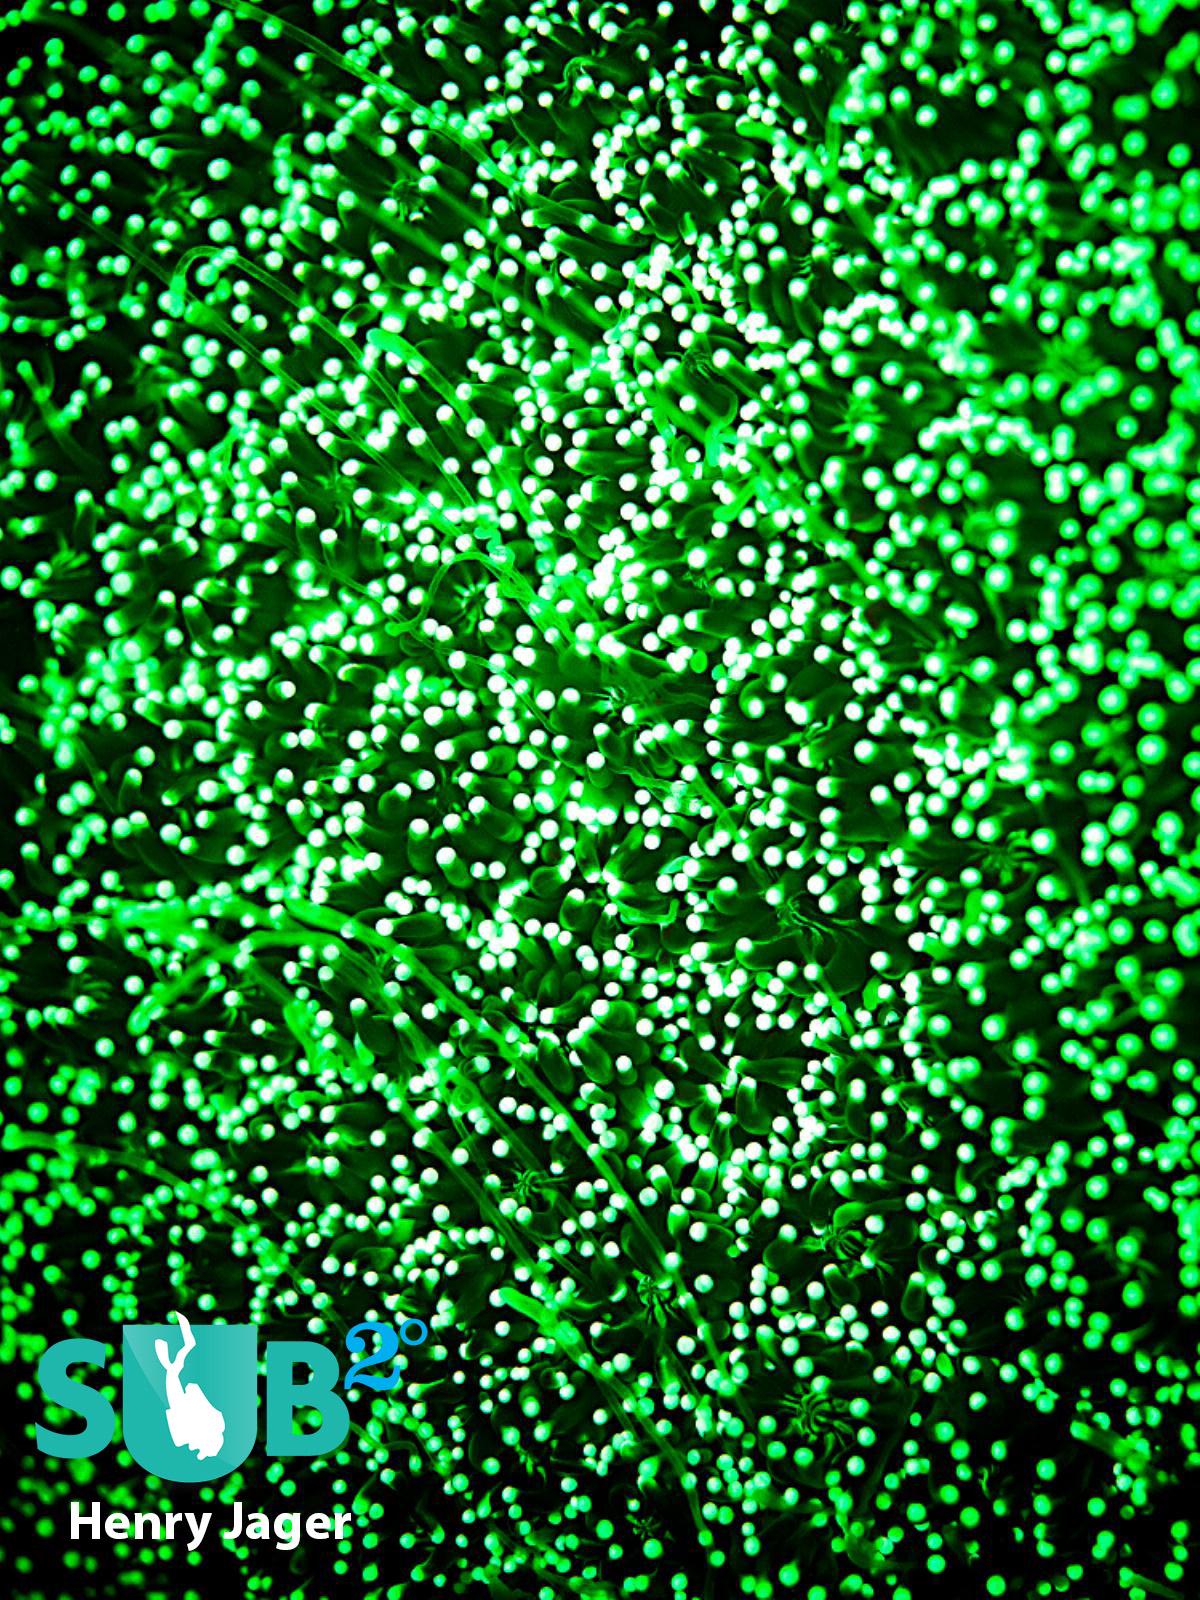 Green fluorescence is the most common. A protein, the green fluorescent protein (GFP) is responsible for this effect.